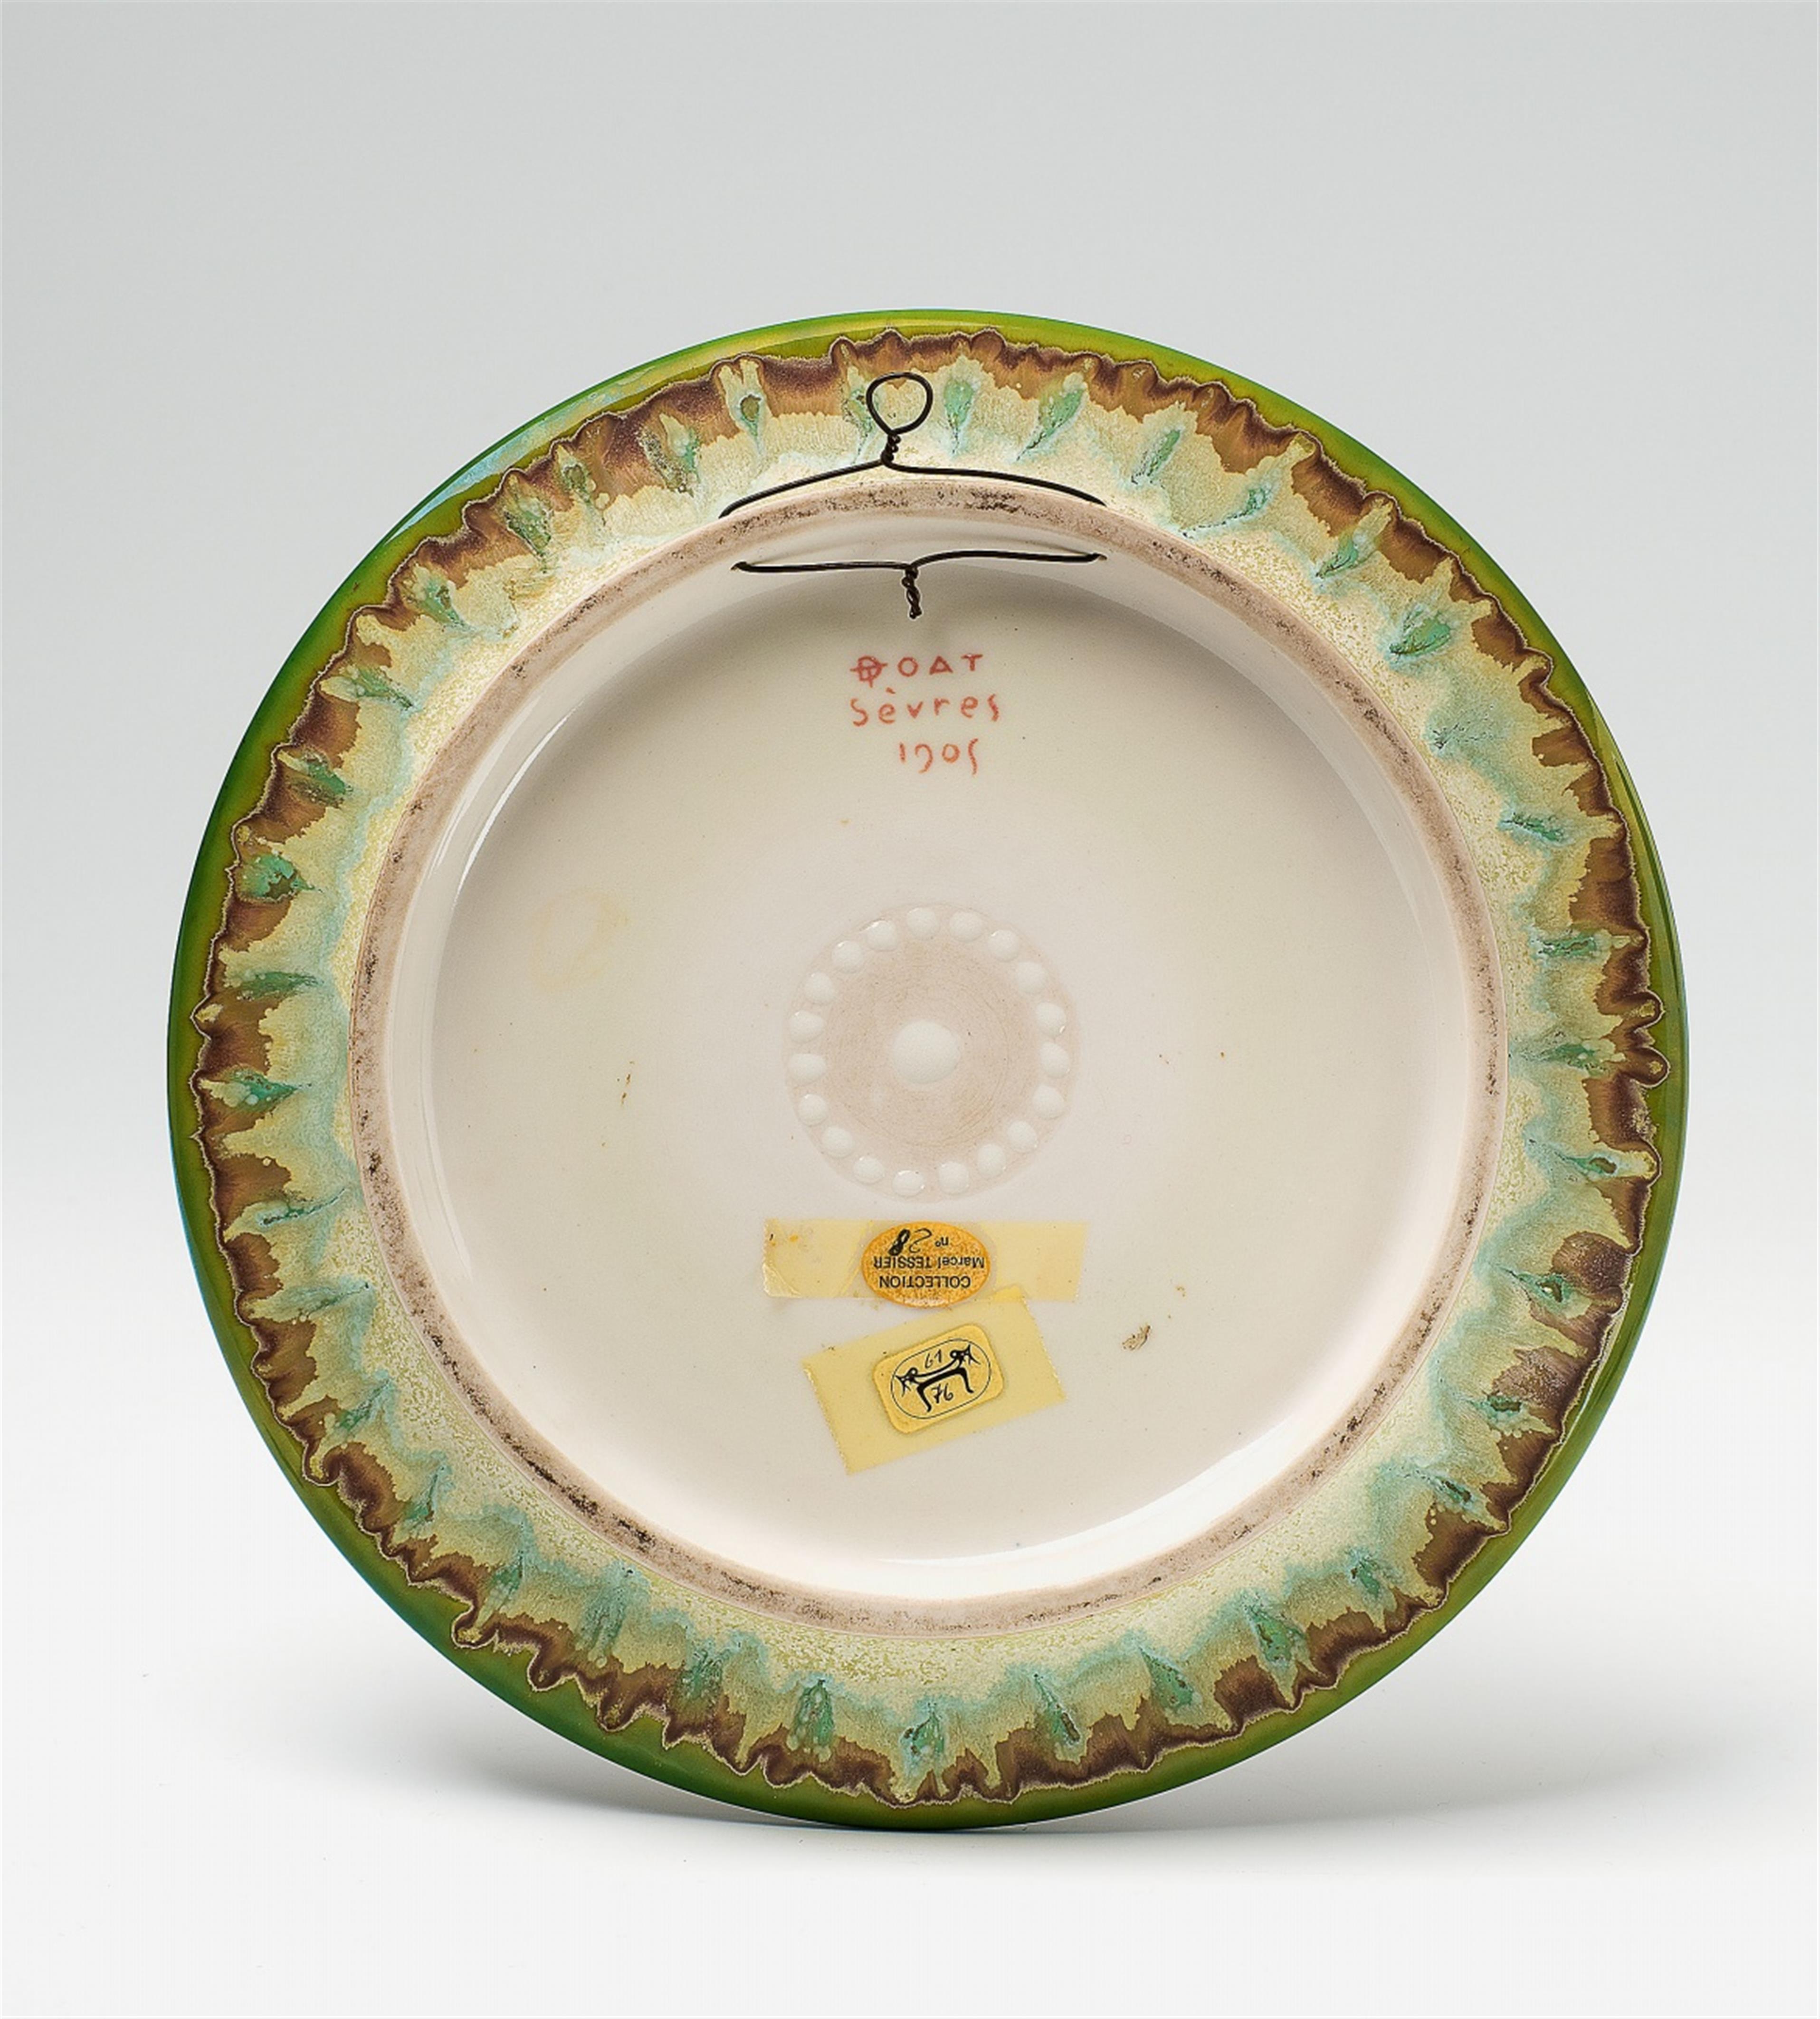 A Sèvres porcelain plate with Minerva by Taxile Doat - image-2